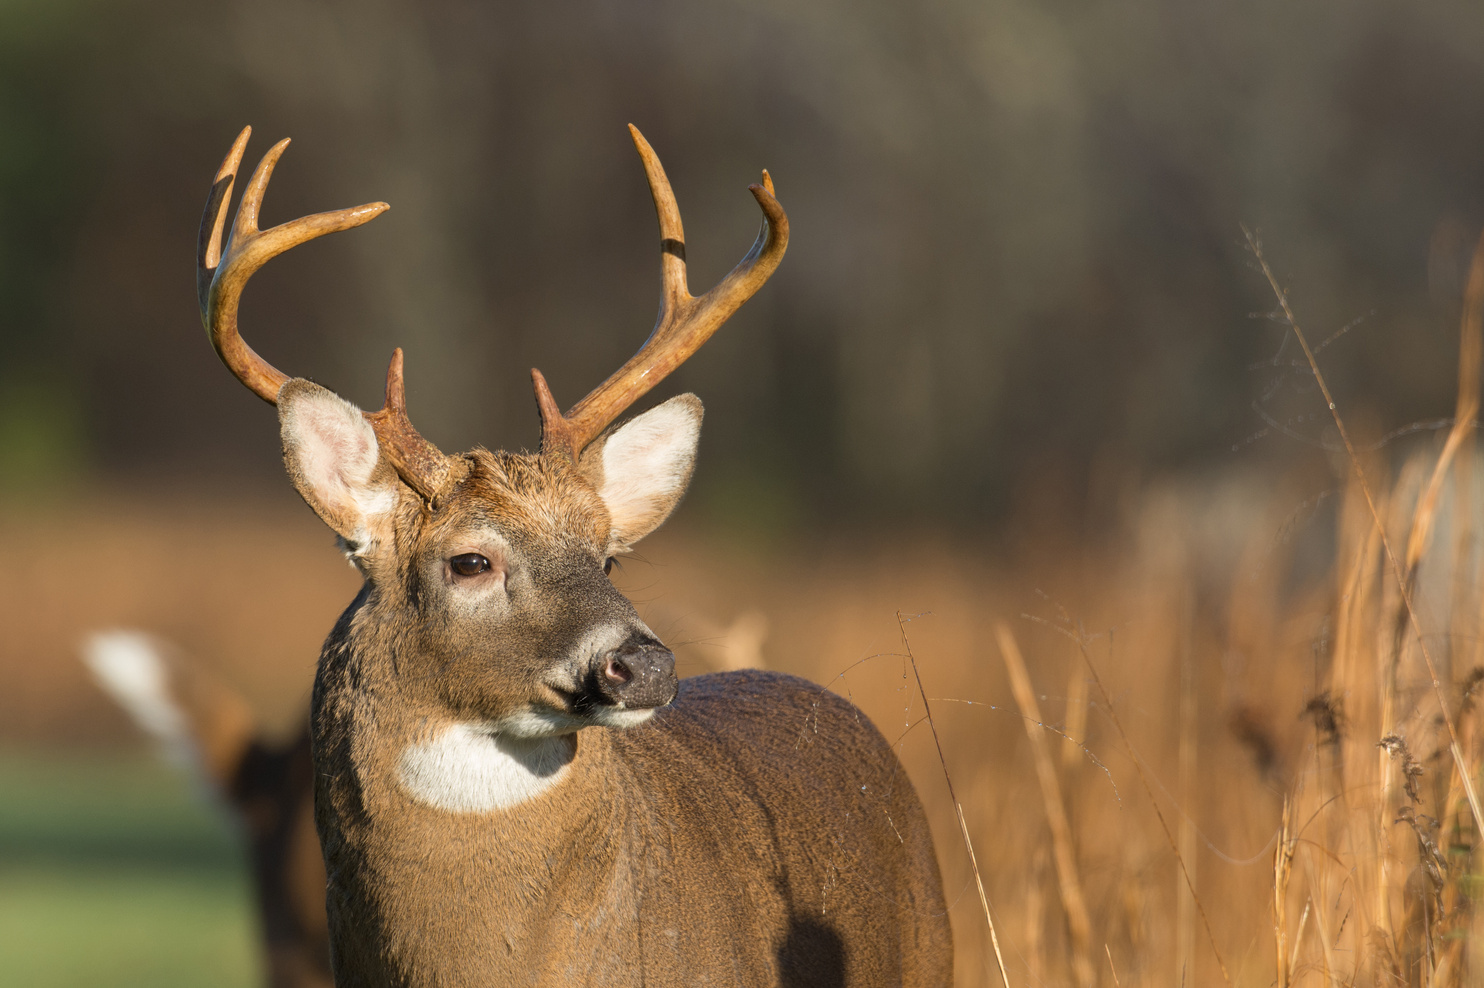 a close up of a deer with antlers in a field